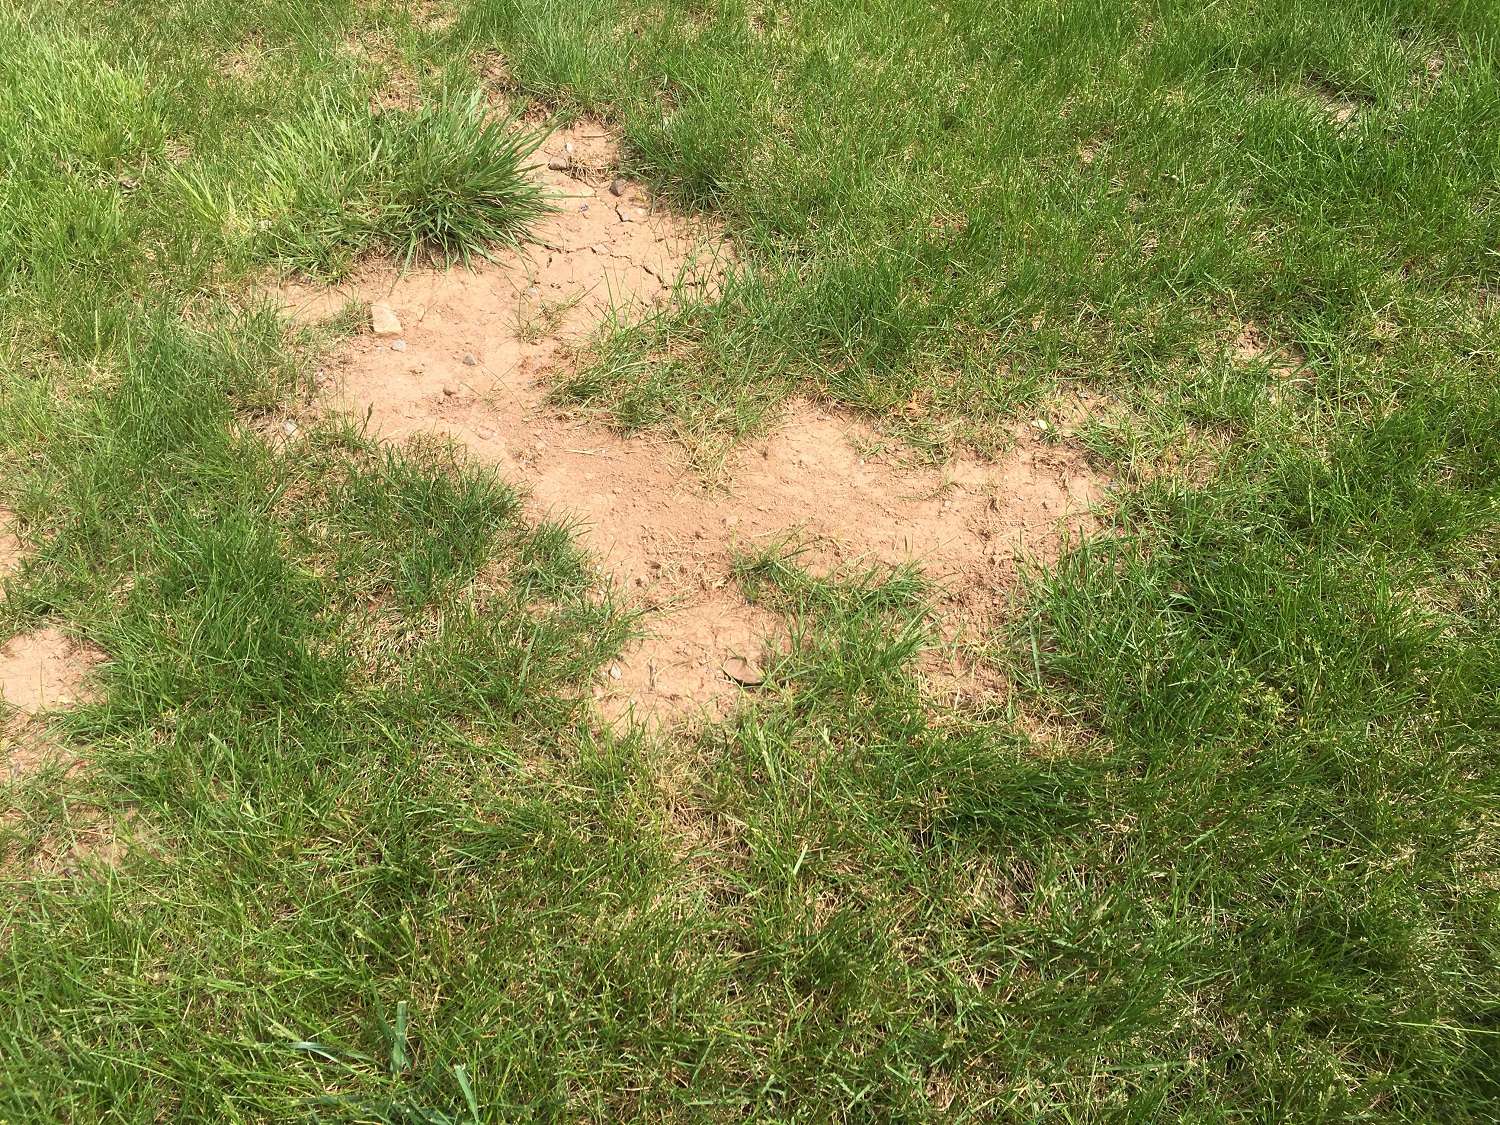 dead spots in lawn caused by leaf build up